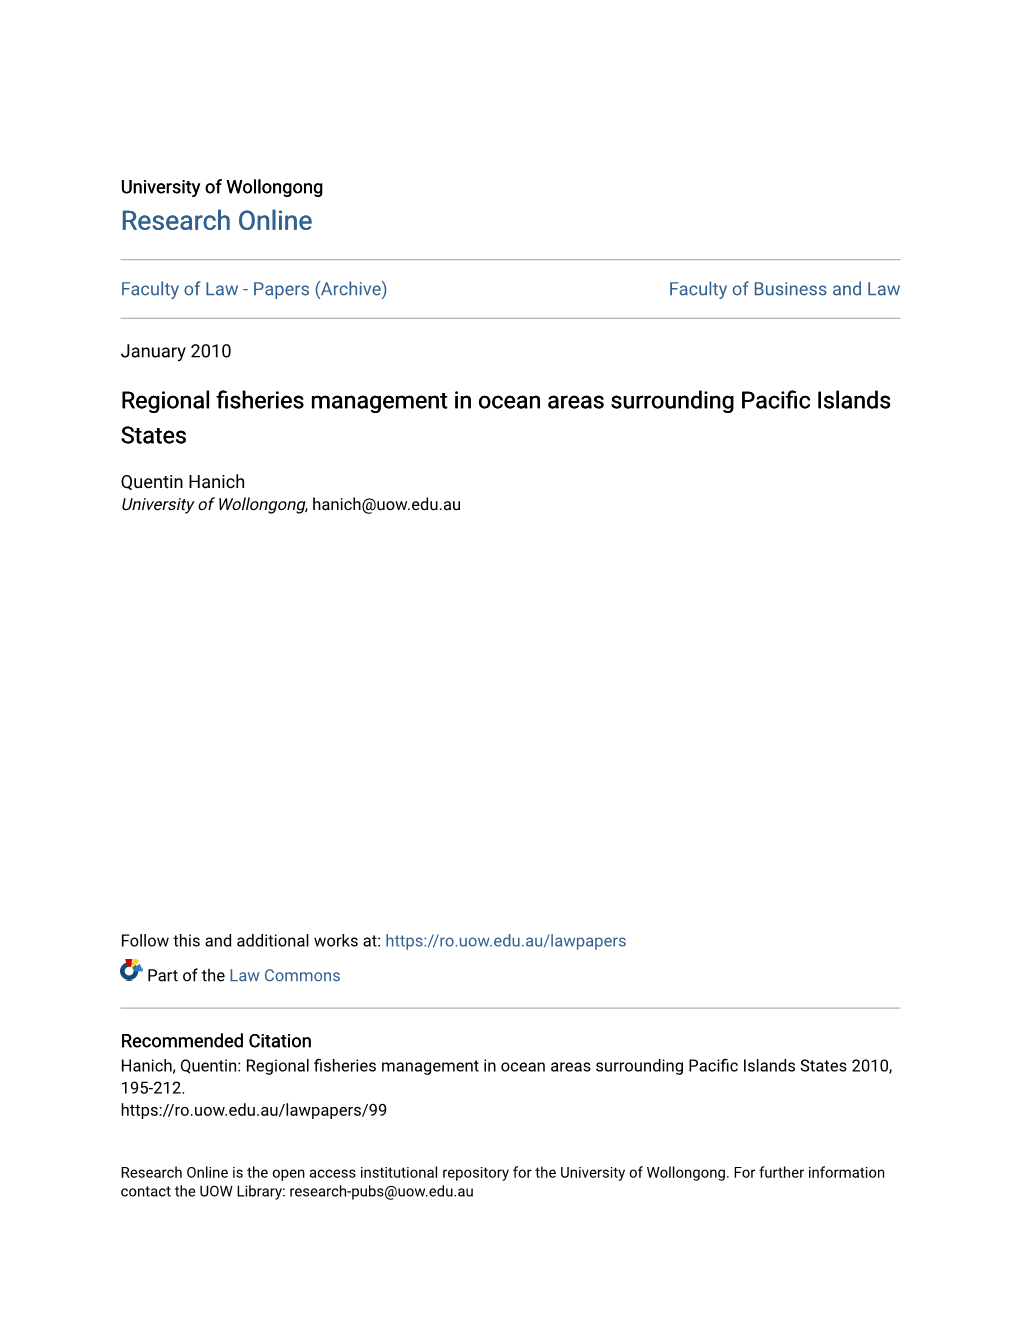 Regional Fisheries Management in Ocean Areas Surrounding Pacific Islands States